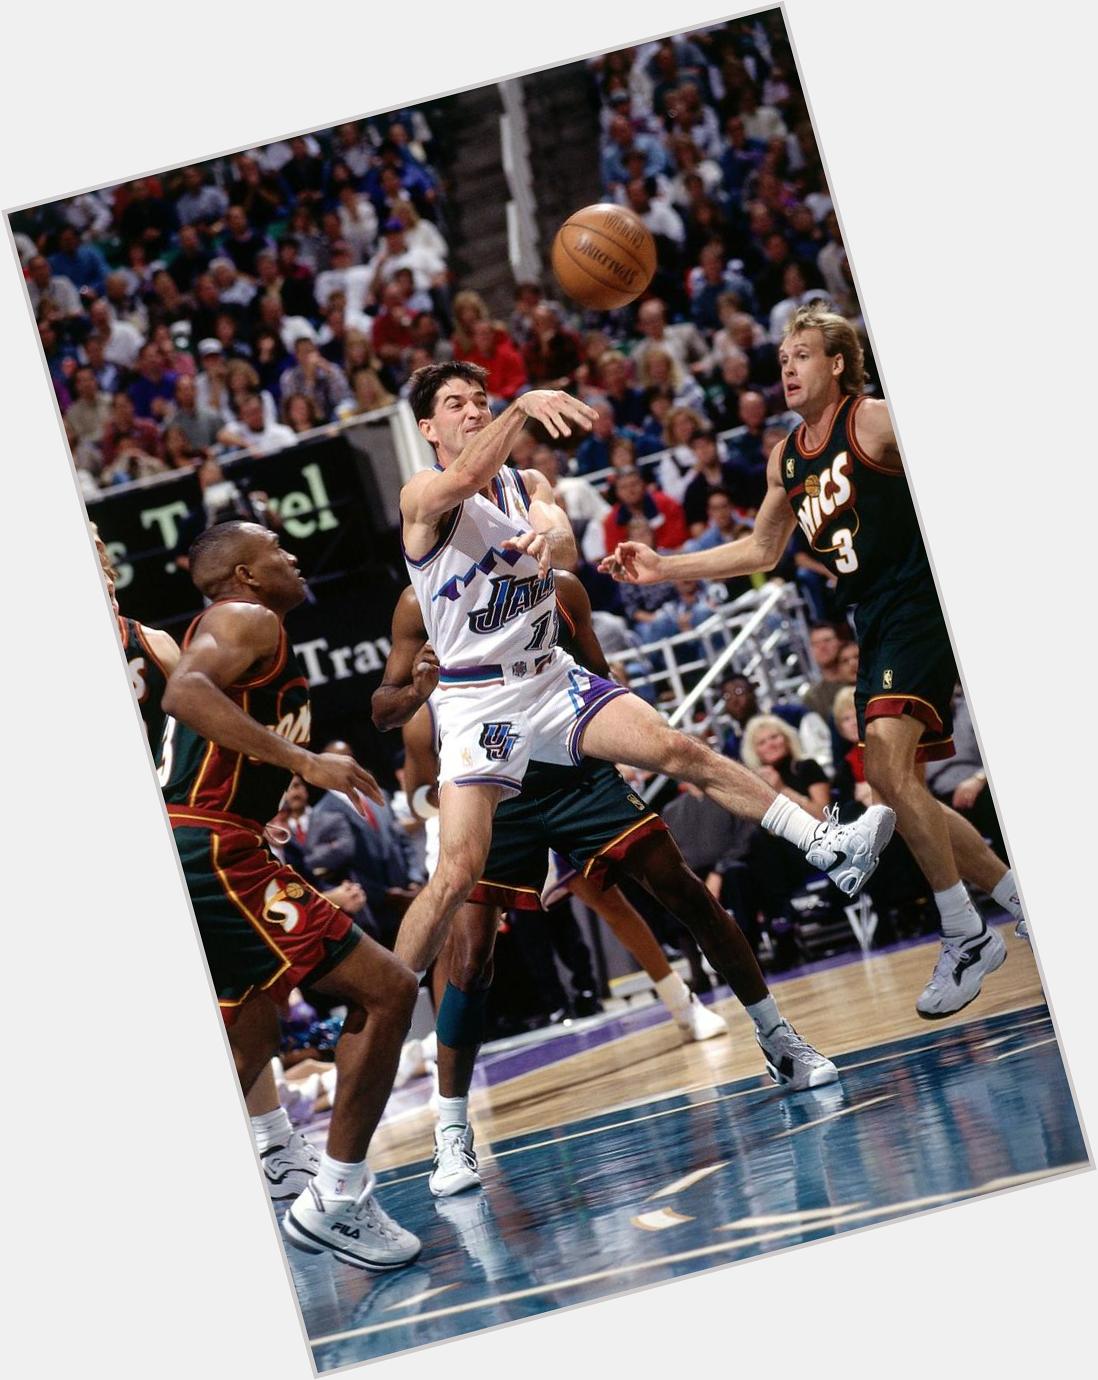  Happy Birthday to the all-time assist leader John Stockton. 